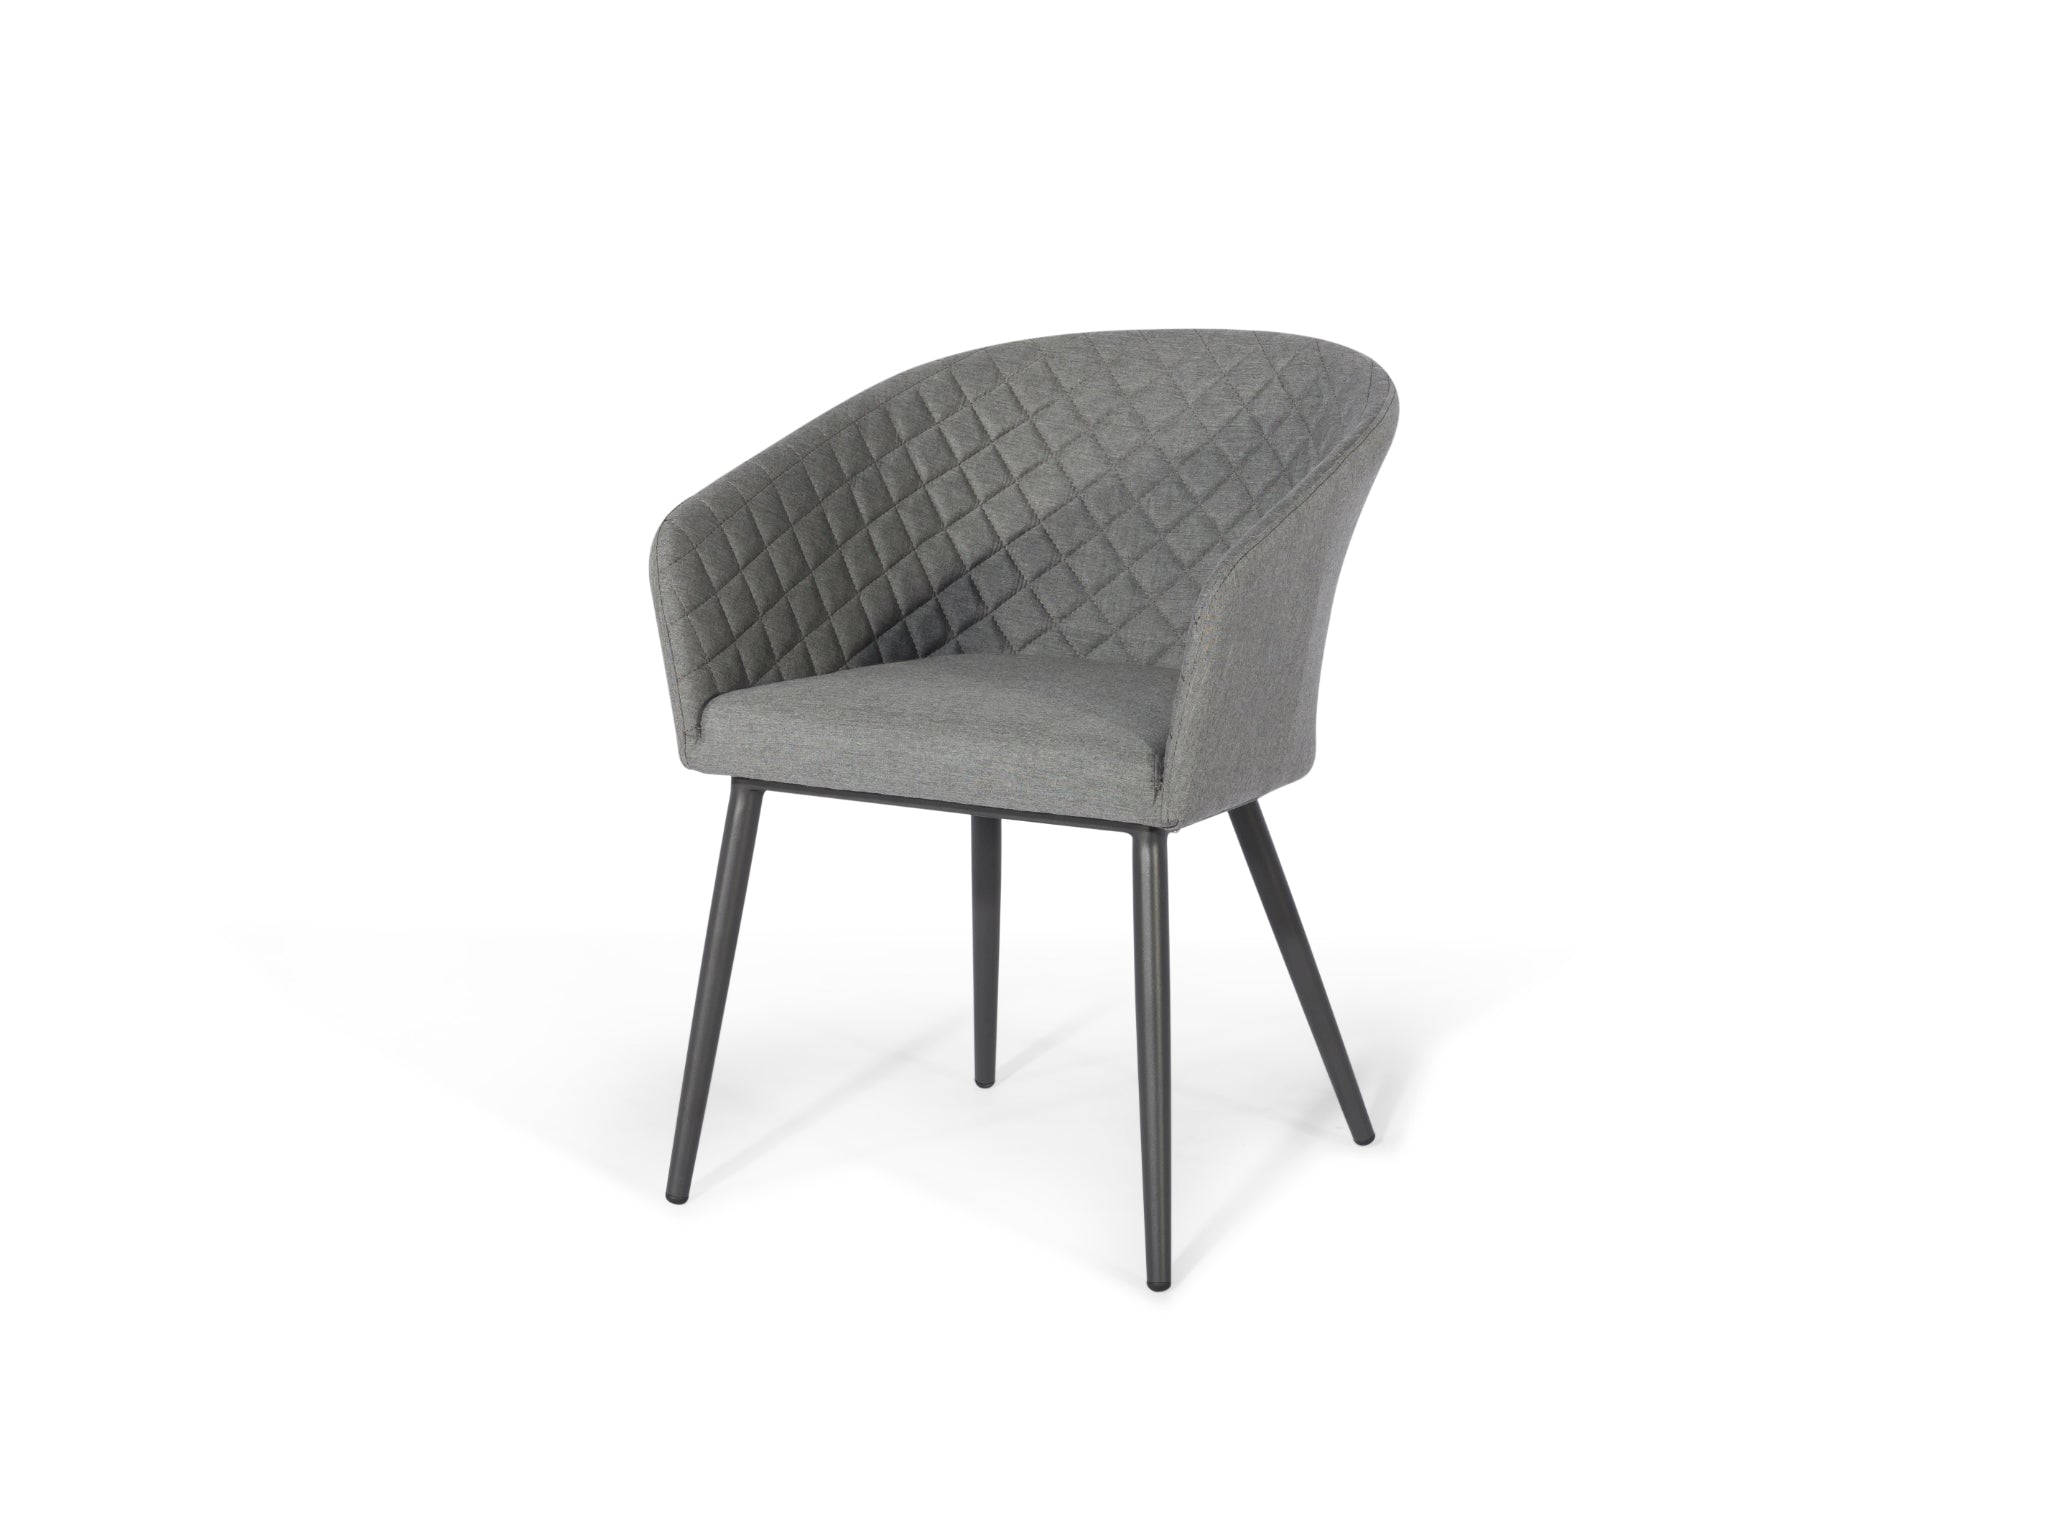 SIMPO by Sunlongarden Ambition Dining Chair